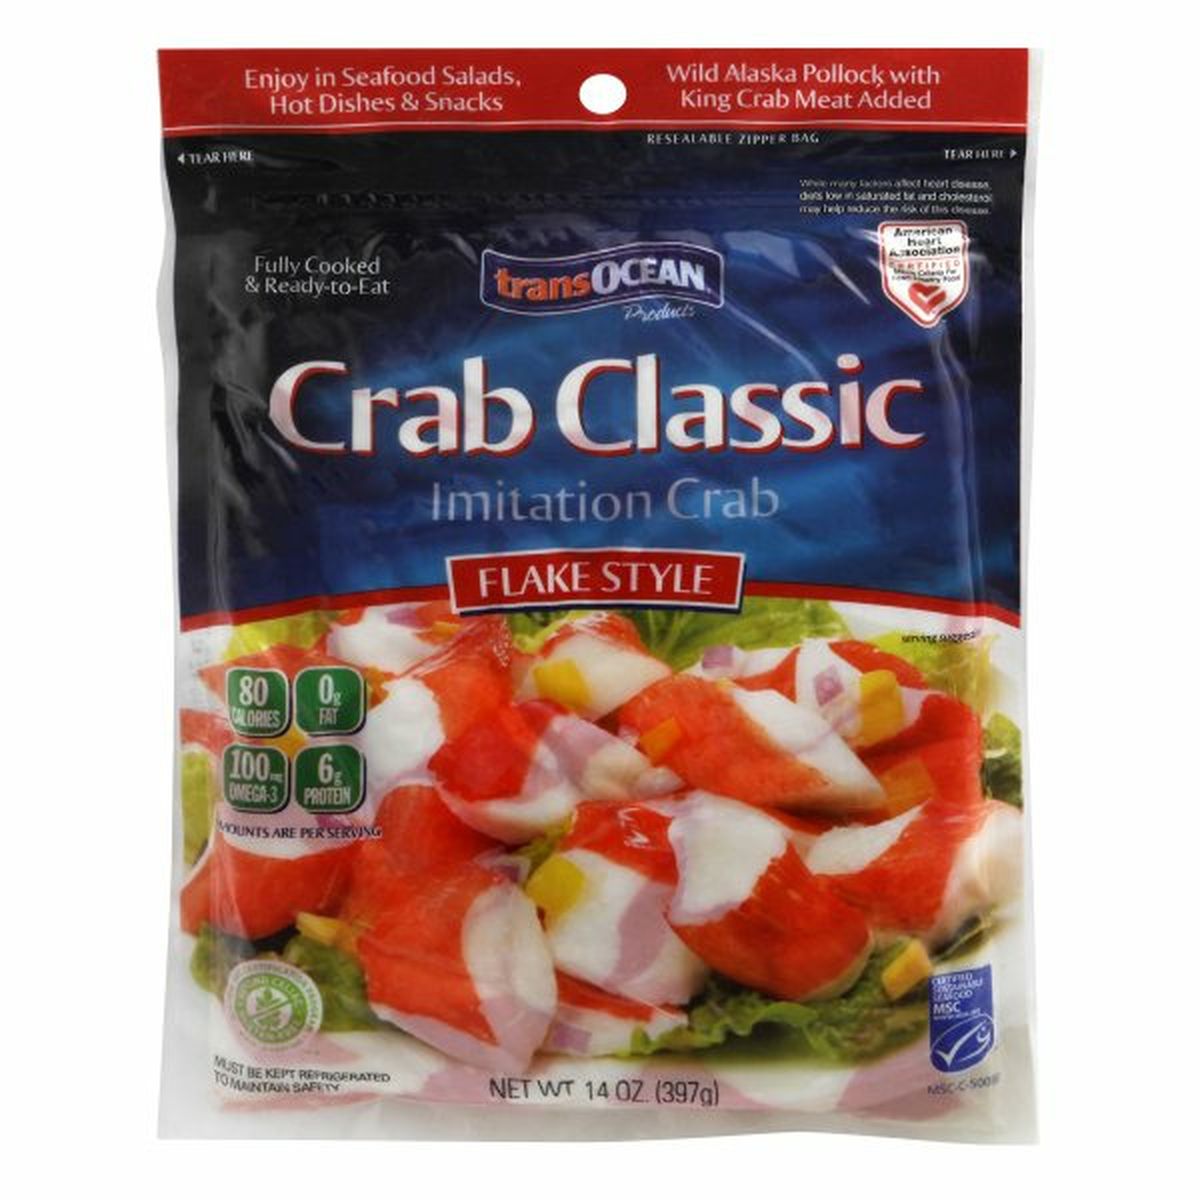 Calories in TransOcean Crab Classic Imitation Crab, Flake Style